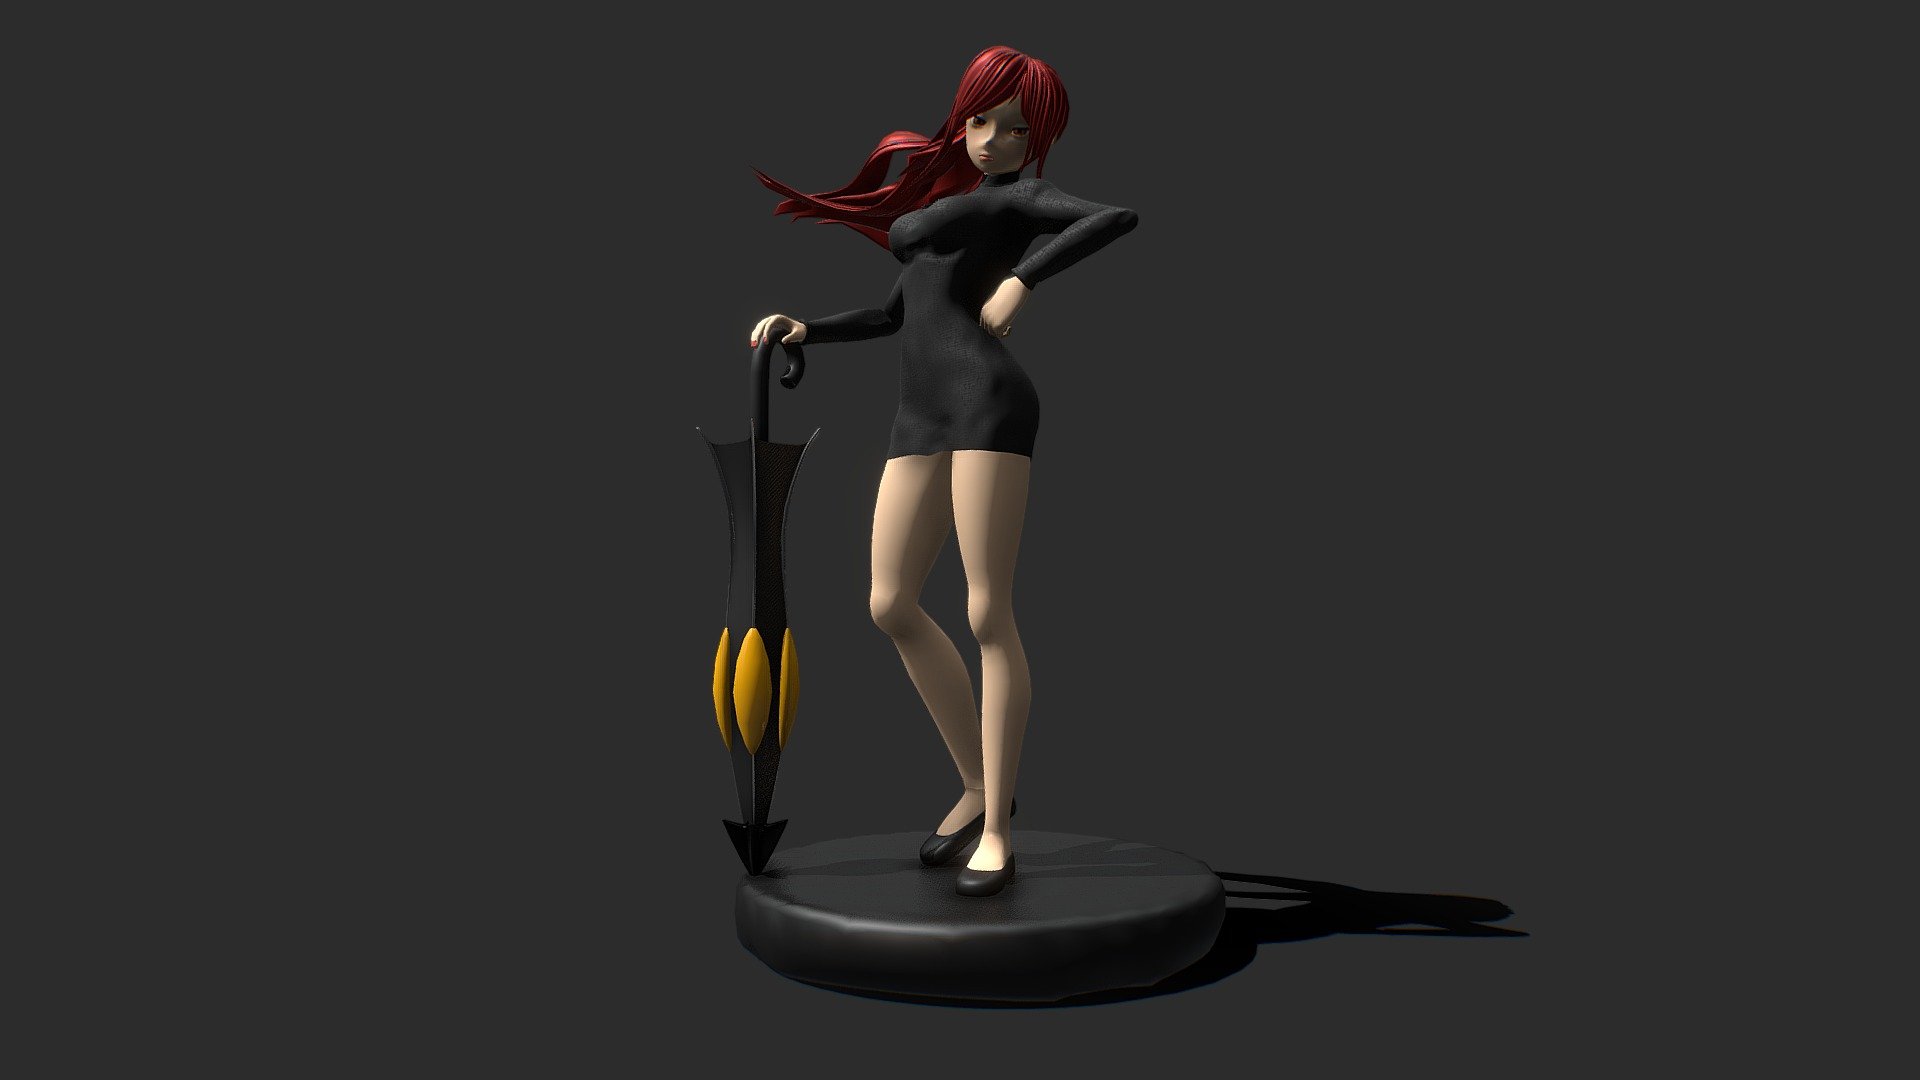 Hi there, These week was making a Parasoul FanArt from the game SkullGirls I hope you like it 

These model was modeling, texturing and rendering in Blender, using Cycles 500 Samples

Final render 




 - Parasoul SkullGirls FanArt - 3D model by Ronme Moreira (@Ronme.Moreira) 3d model